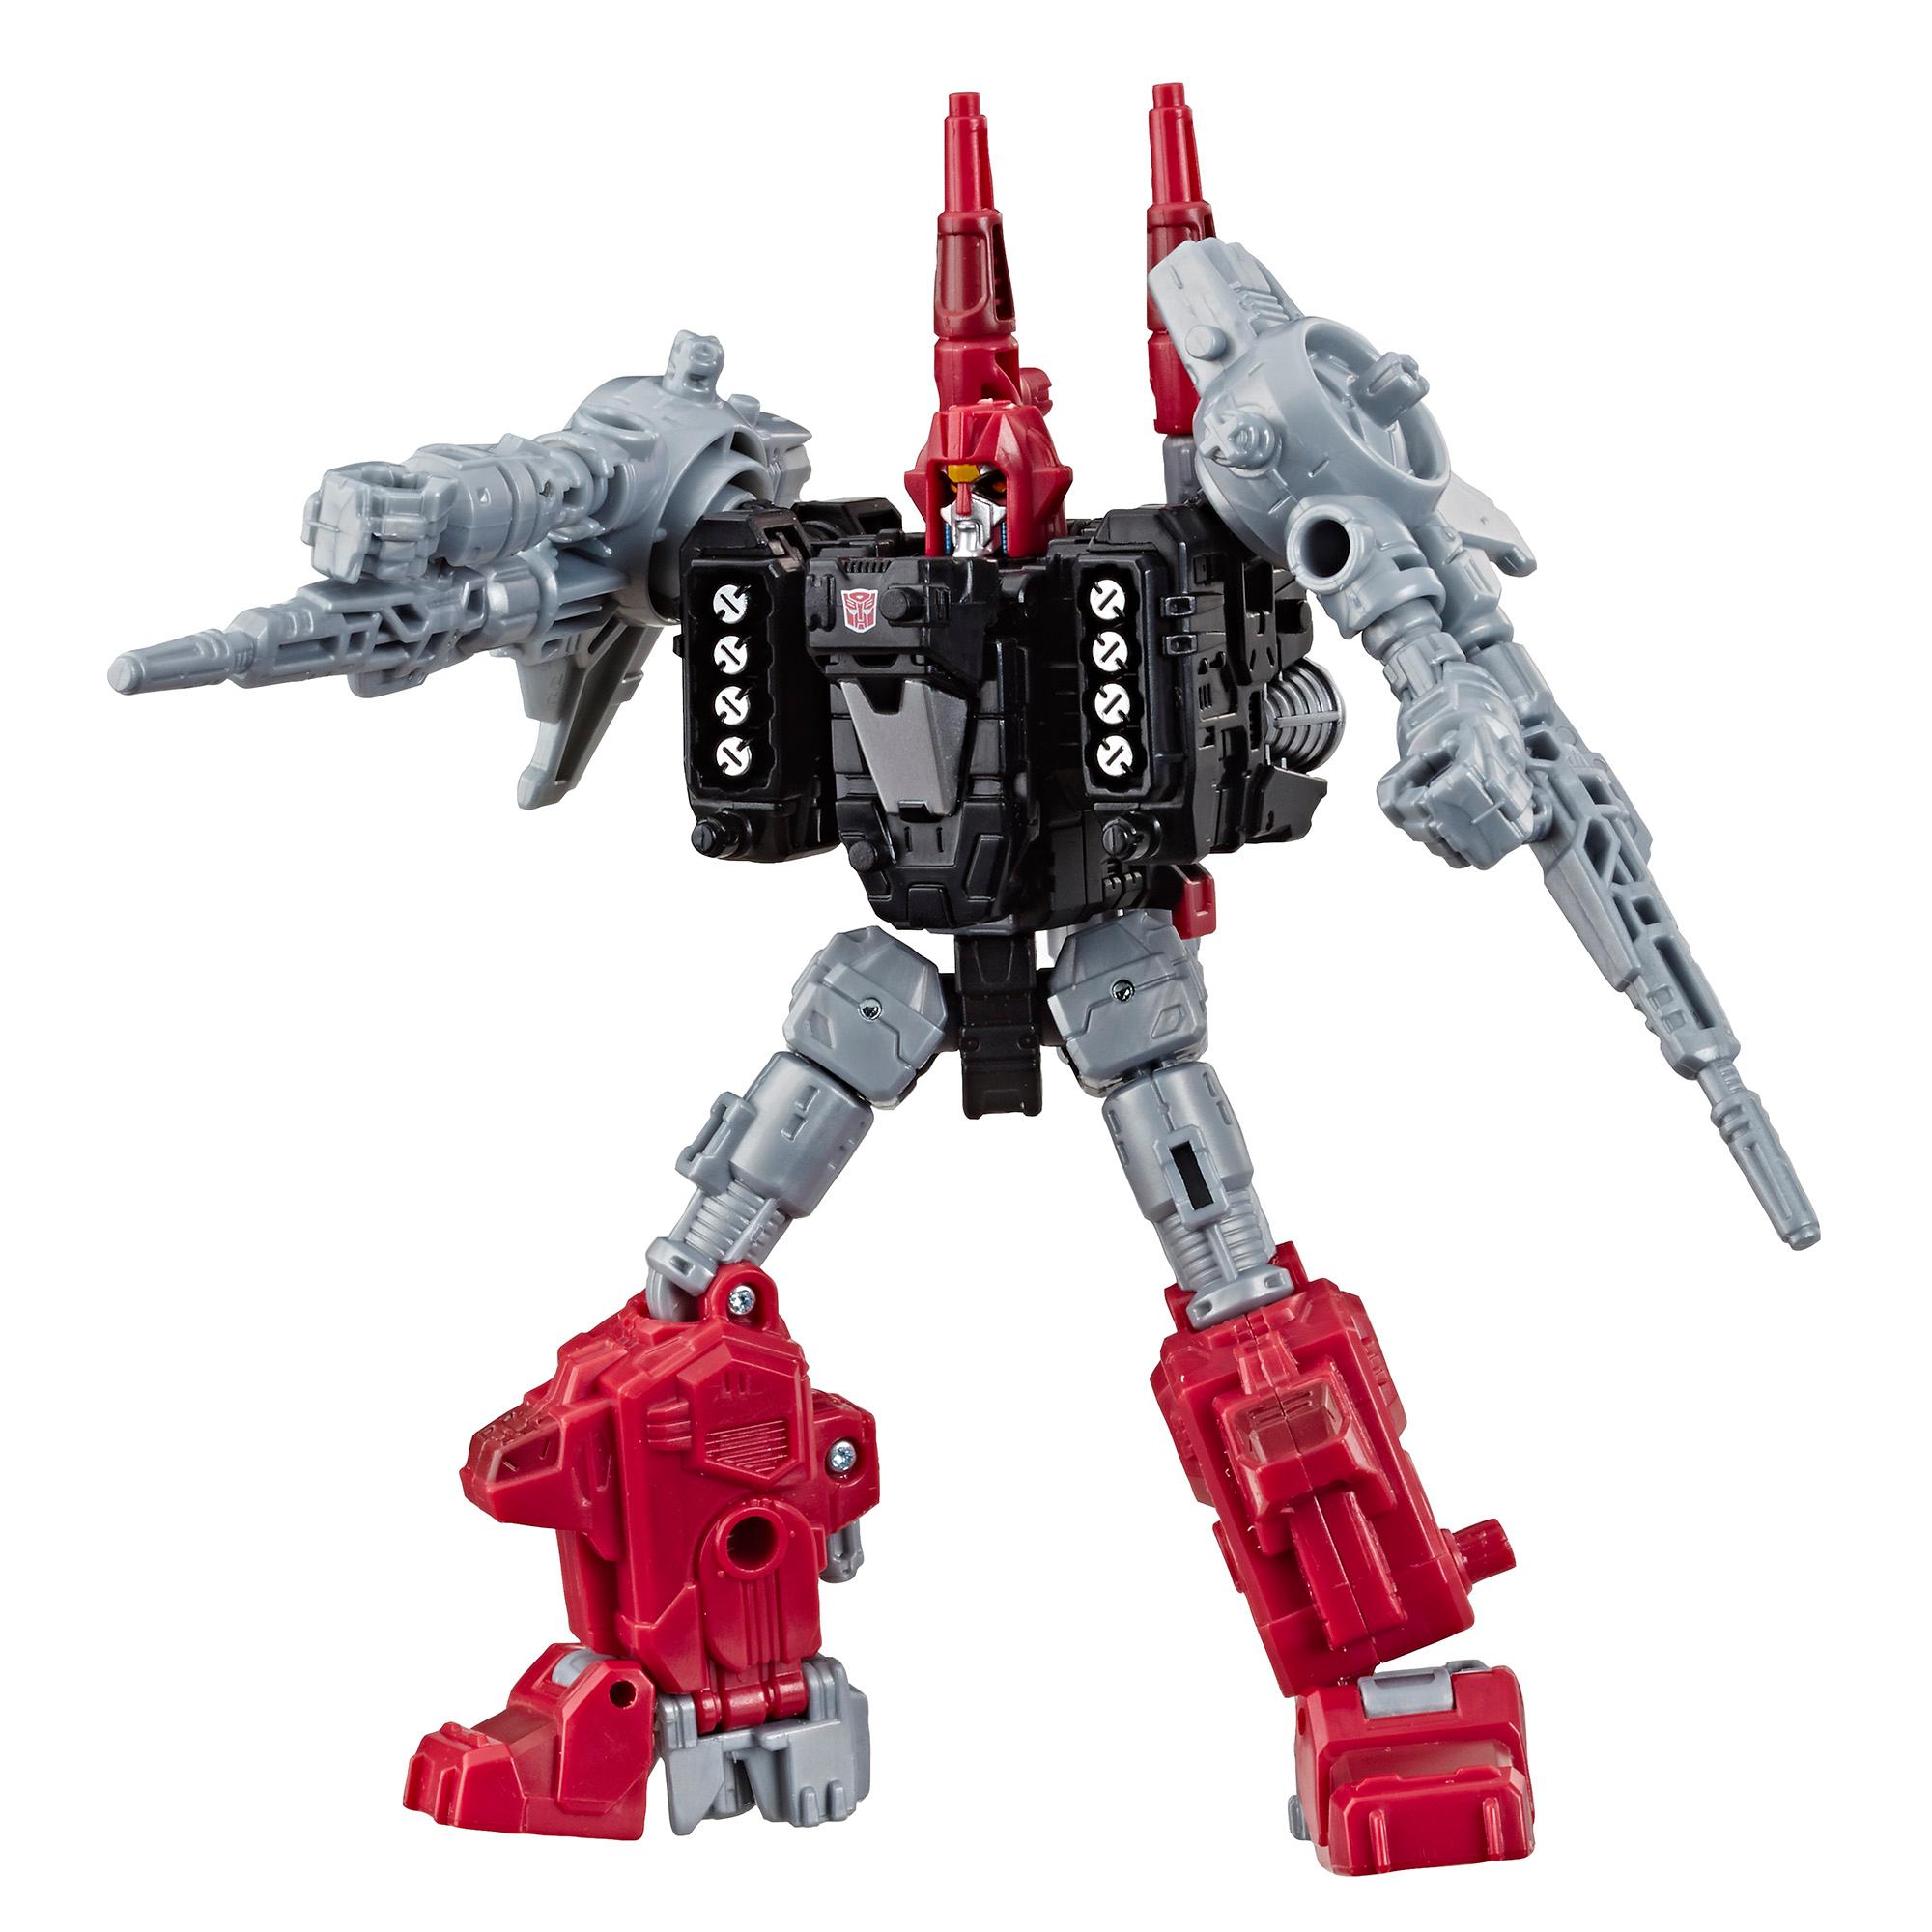 Transformers Generations Selects WFC-GS04 Powerdasher Cromar, War for Cybertron Deluxe Figure - Collector Figure, 5.5-inch